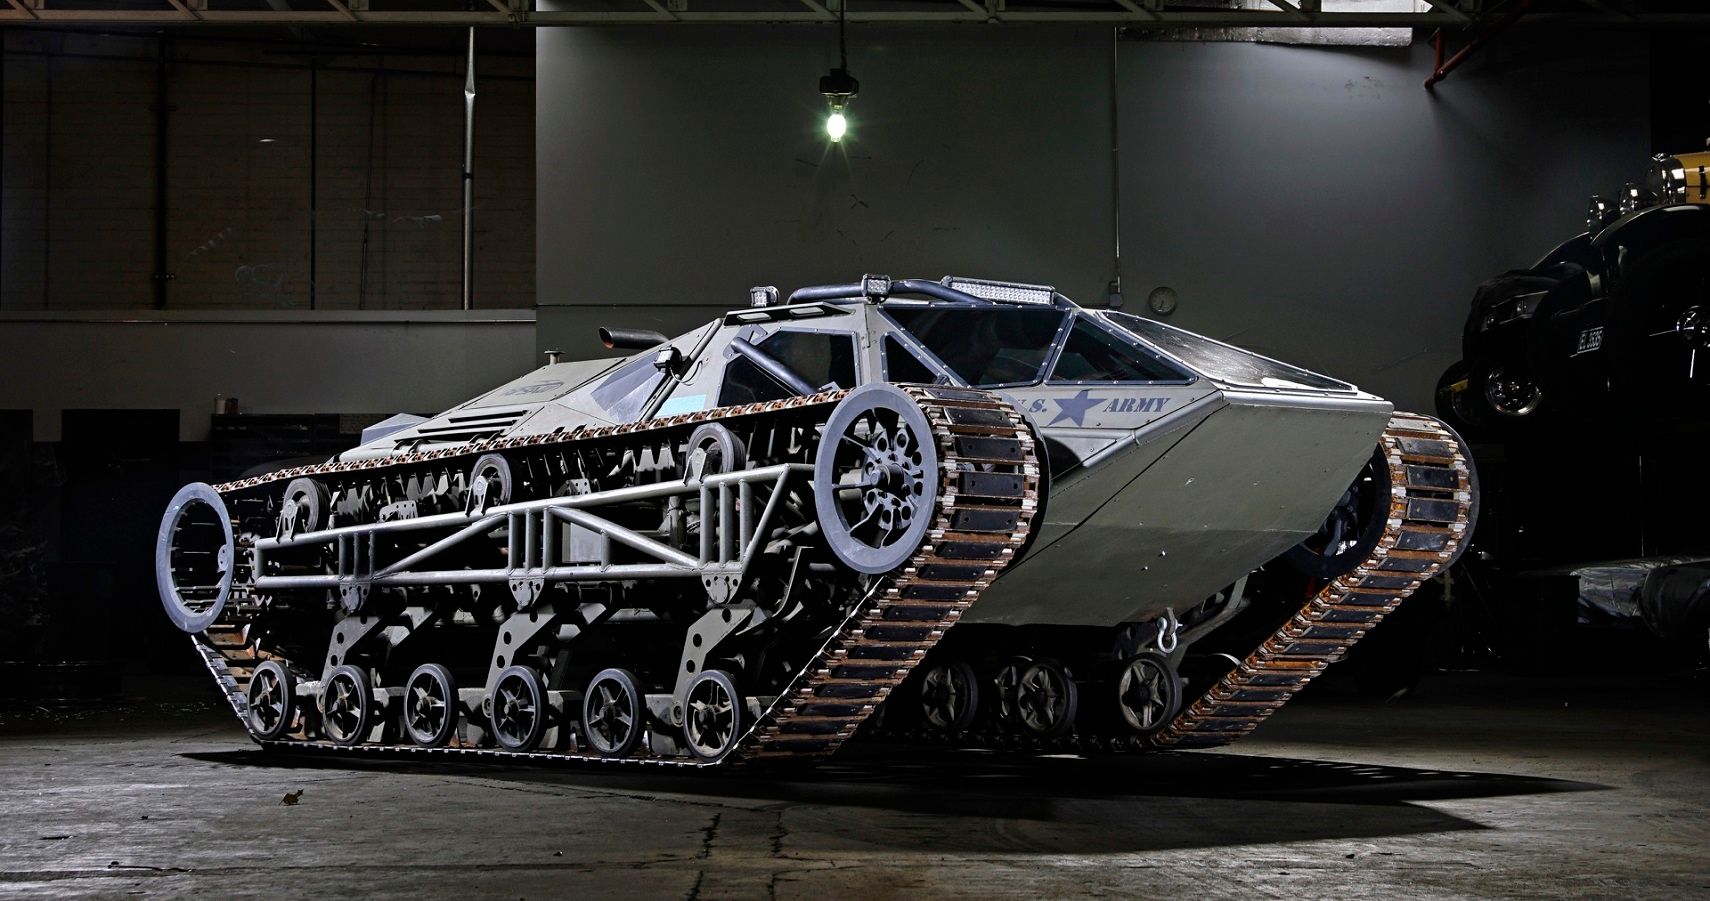 Here's where Tej's tank from Fate of the Furious is now